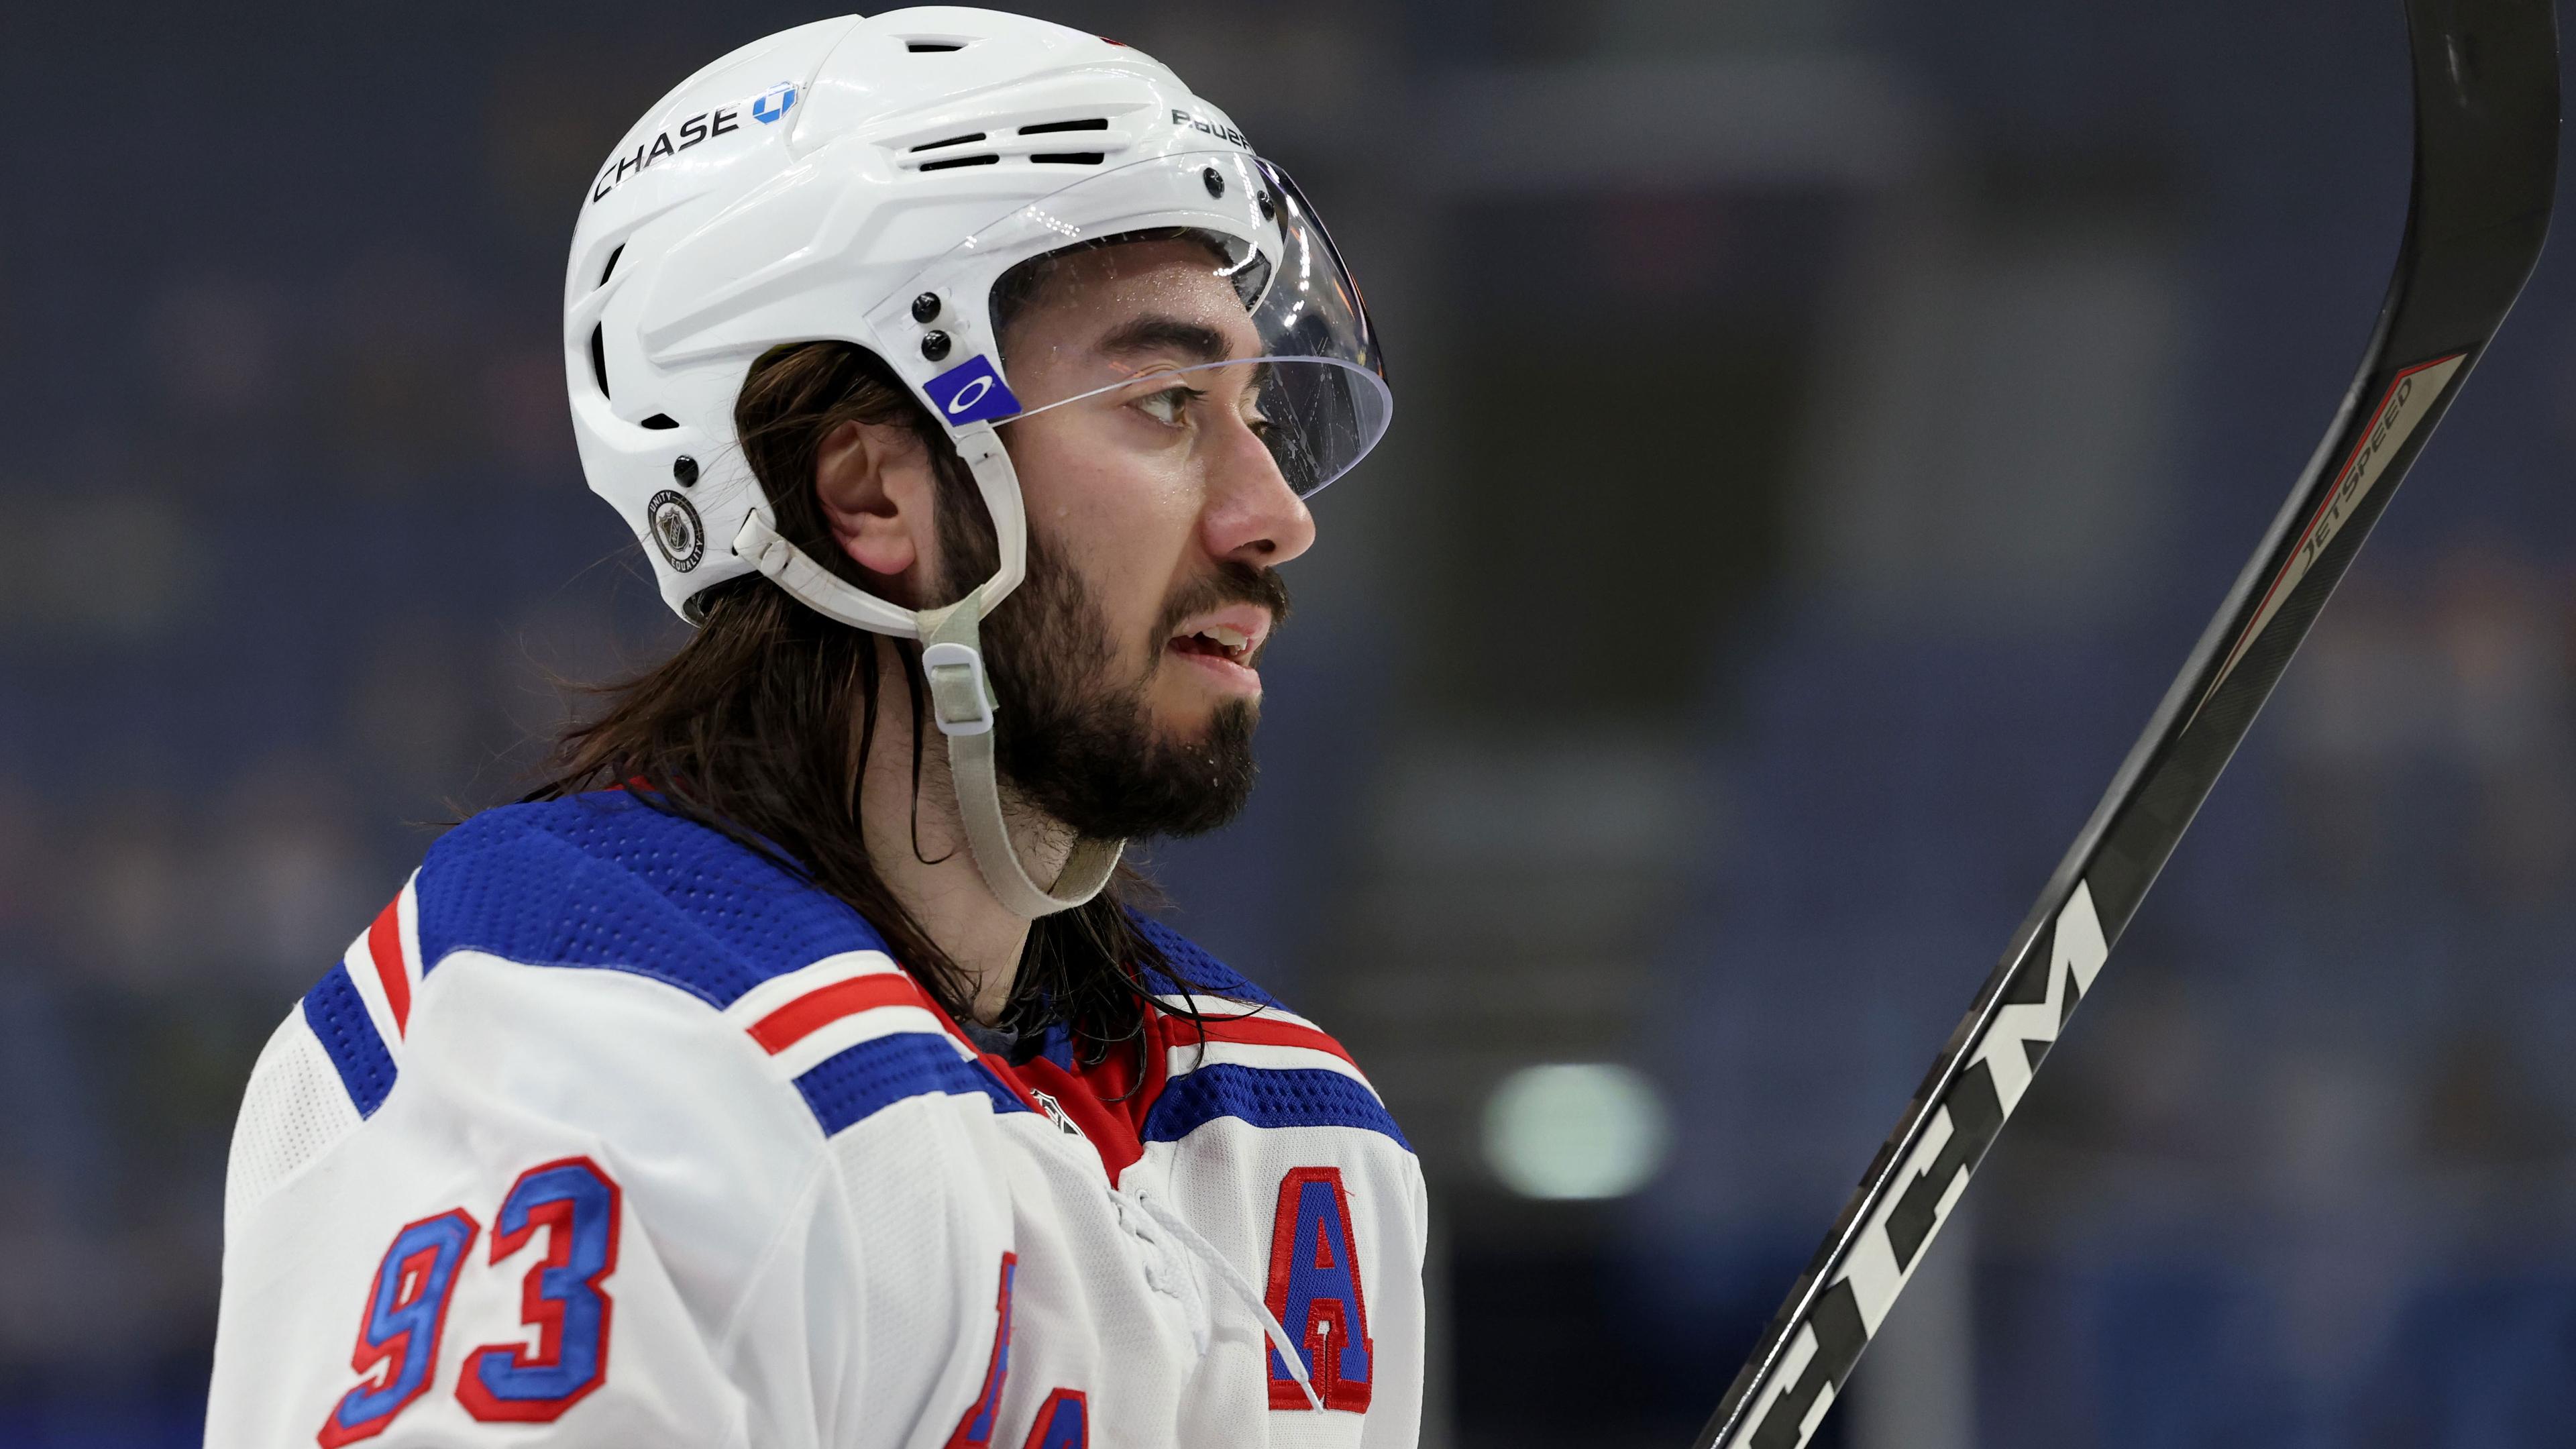 Apr 1, 2021; Buffalo, New York, USA; New York Rangers center Mika Zibanejad (93) during a stoppage in play against the Buffalo Sabres during the third period at KeyBank Center. / Timothy T. Ludwig-USA TODAY Sports